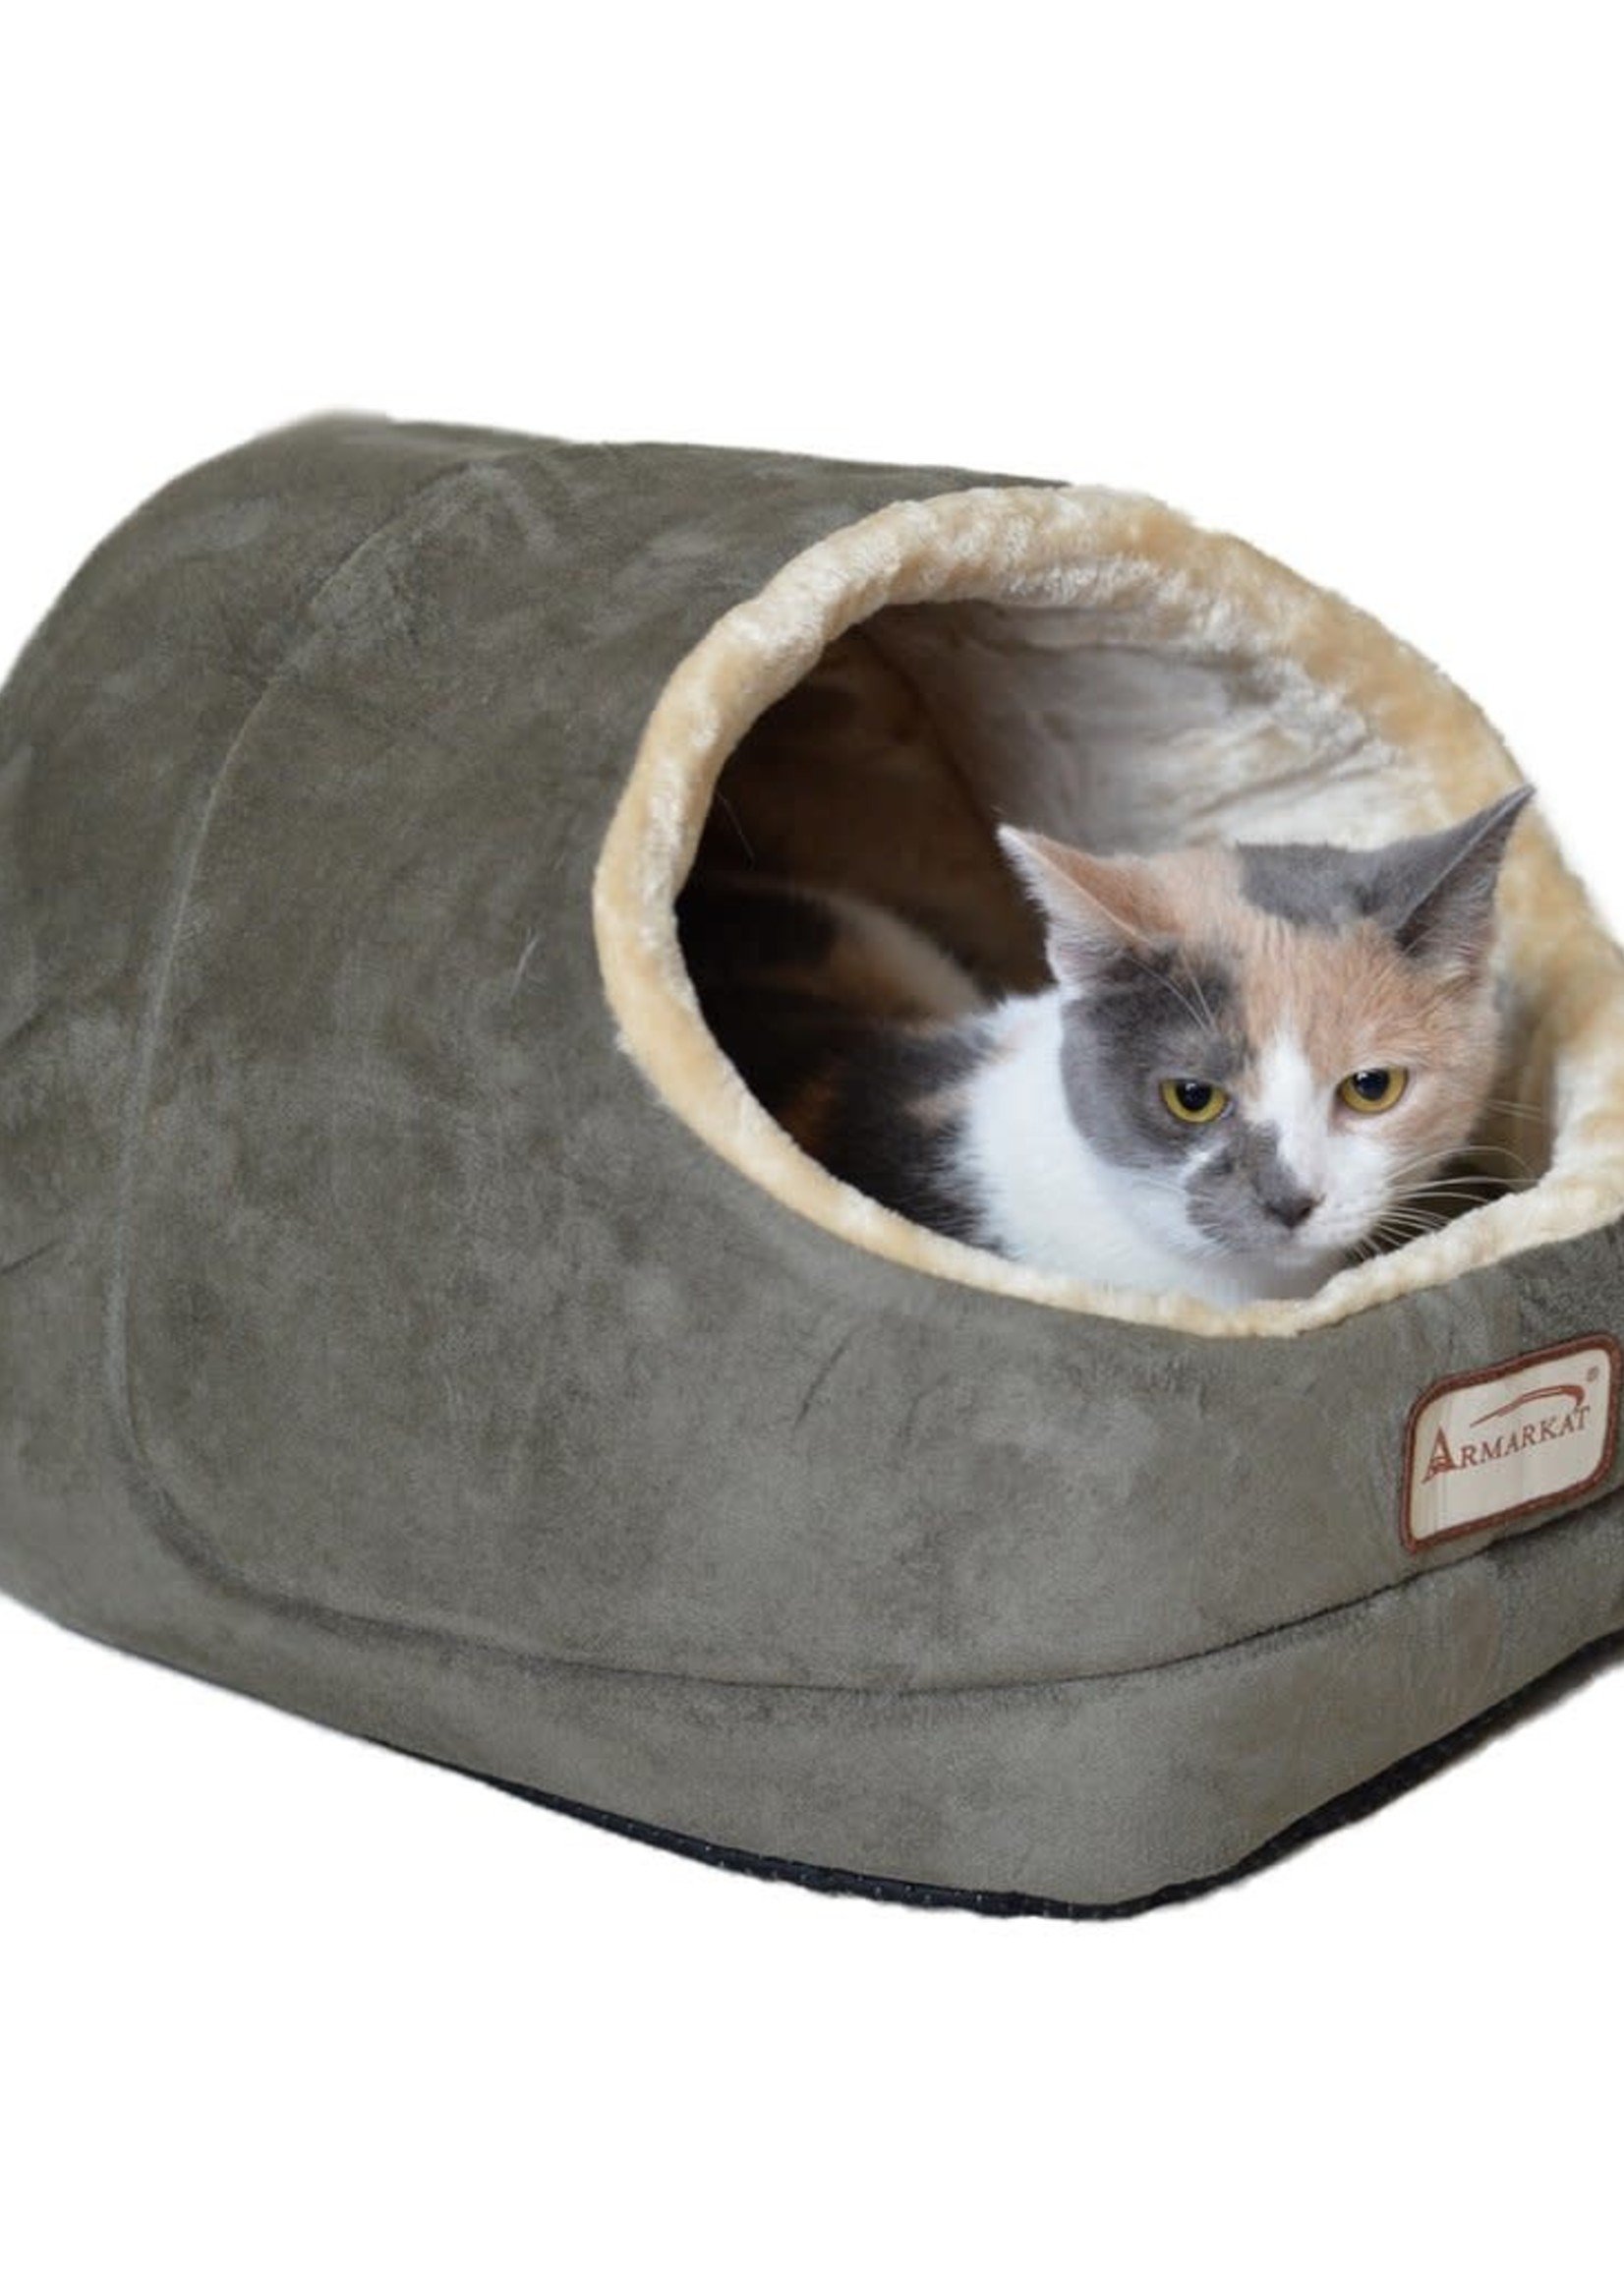 Armarkat Armarkat 18"x 12.5"x 11.5" Faux Suede Cat Bed and Cave Laurel Green